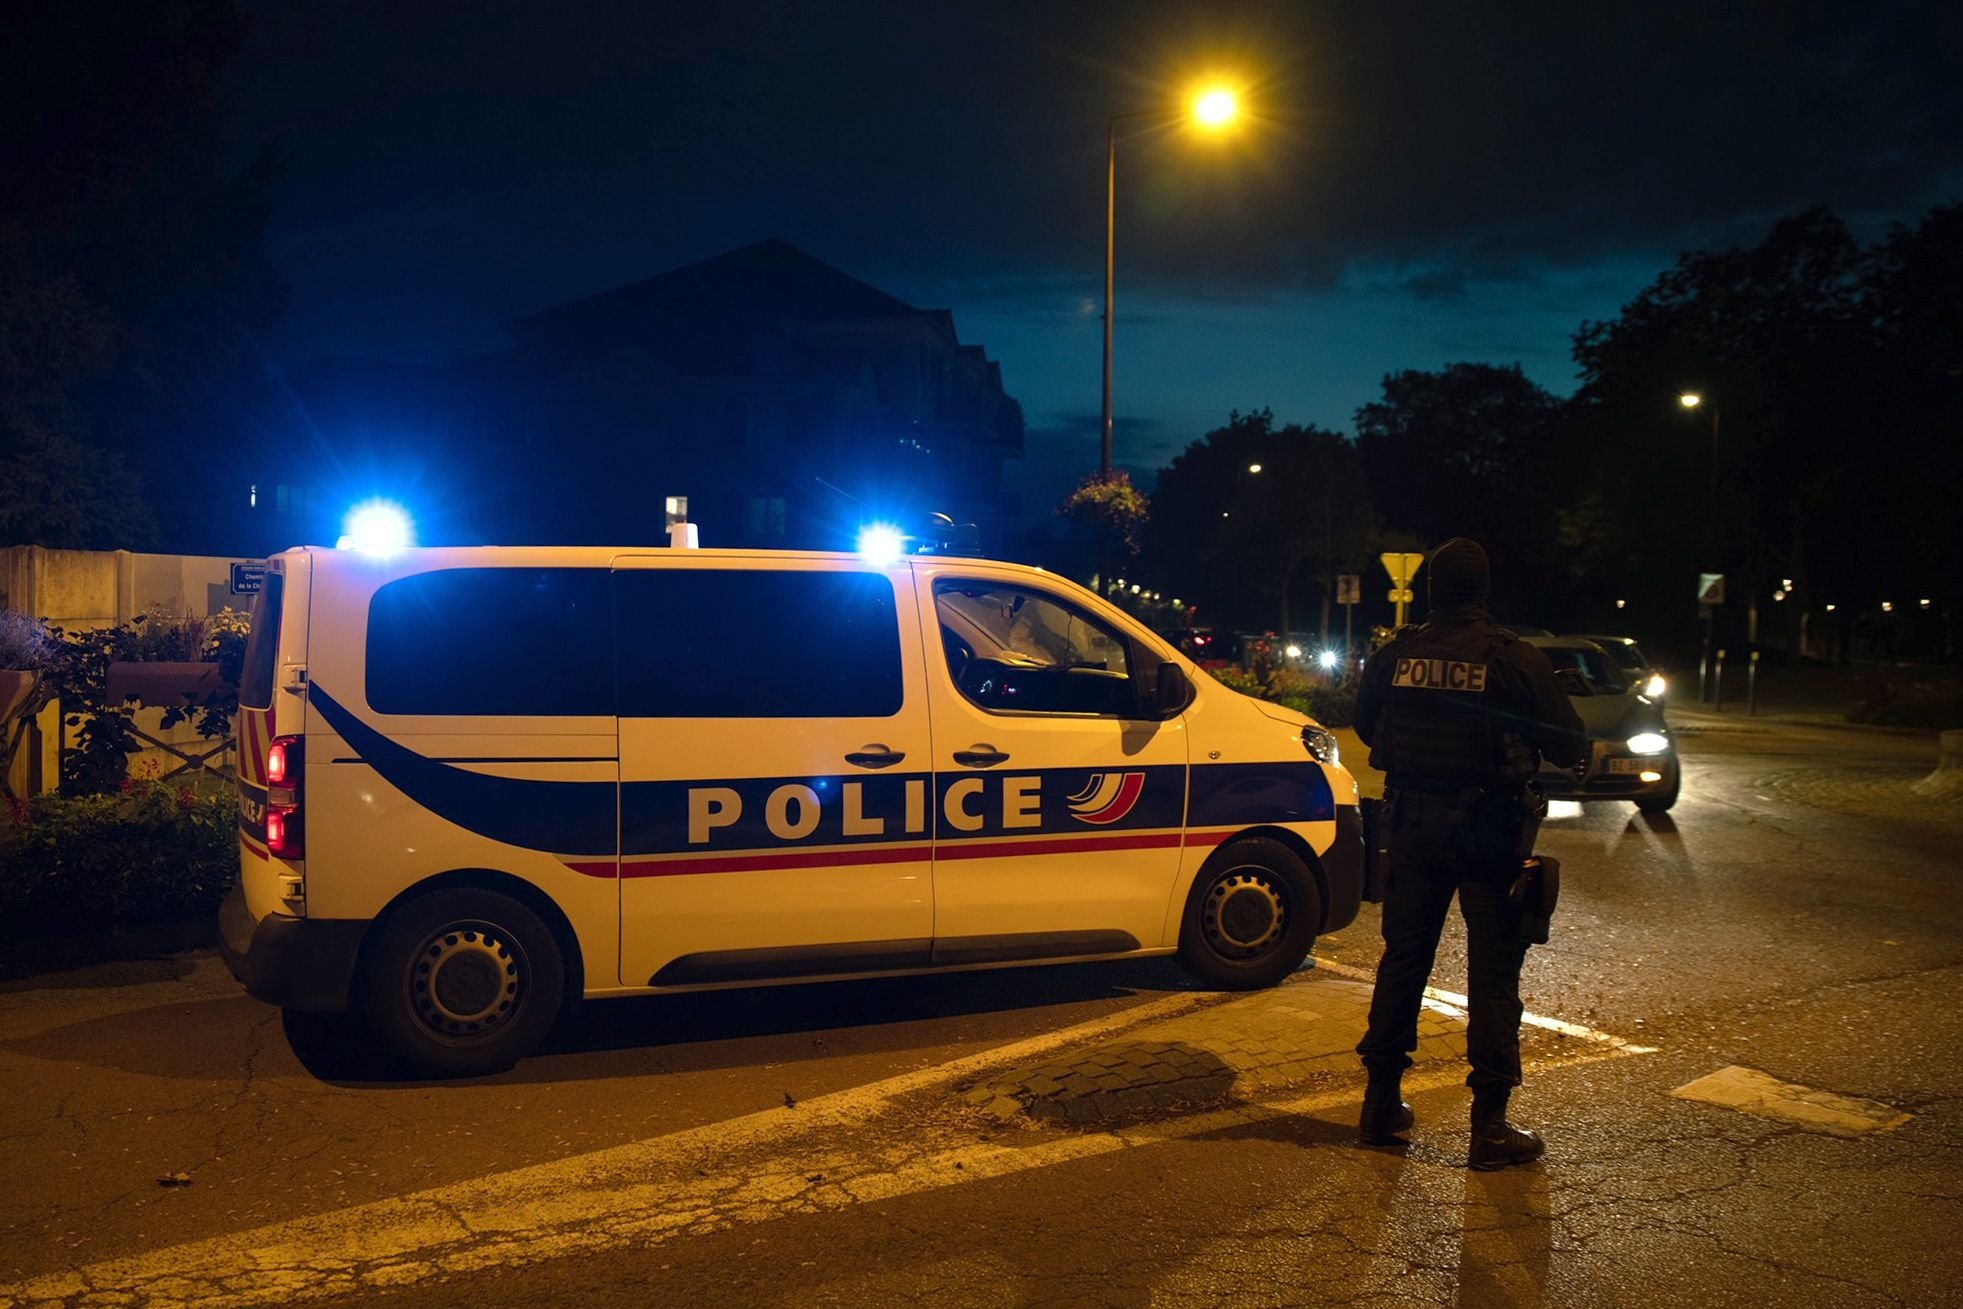 France arrests Italian over 160 child rapes, assaults | Daily Sabah